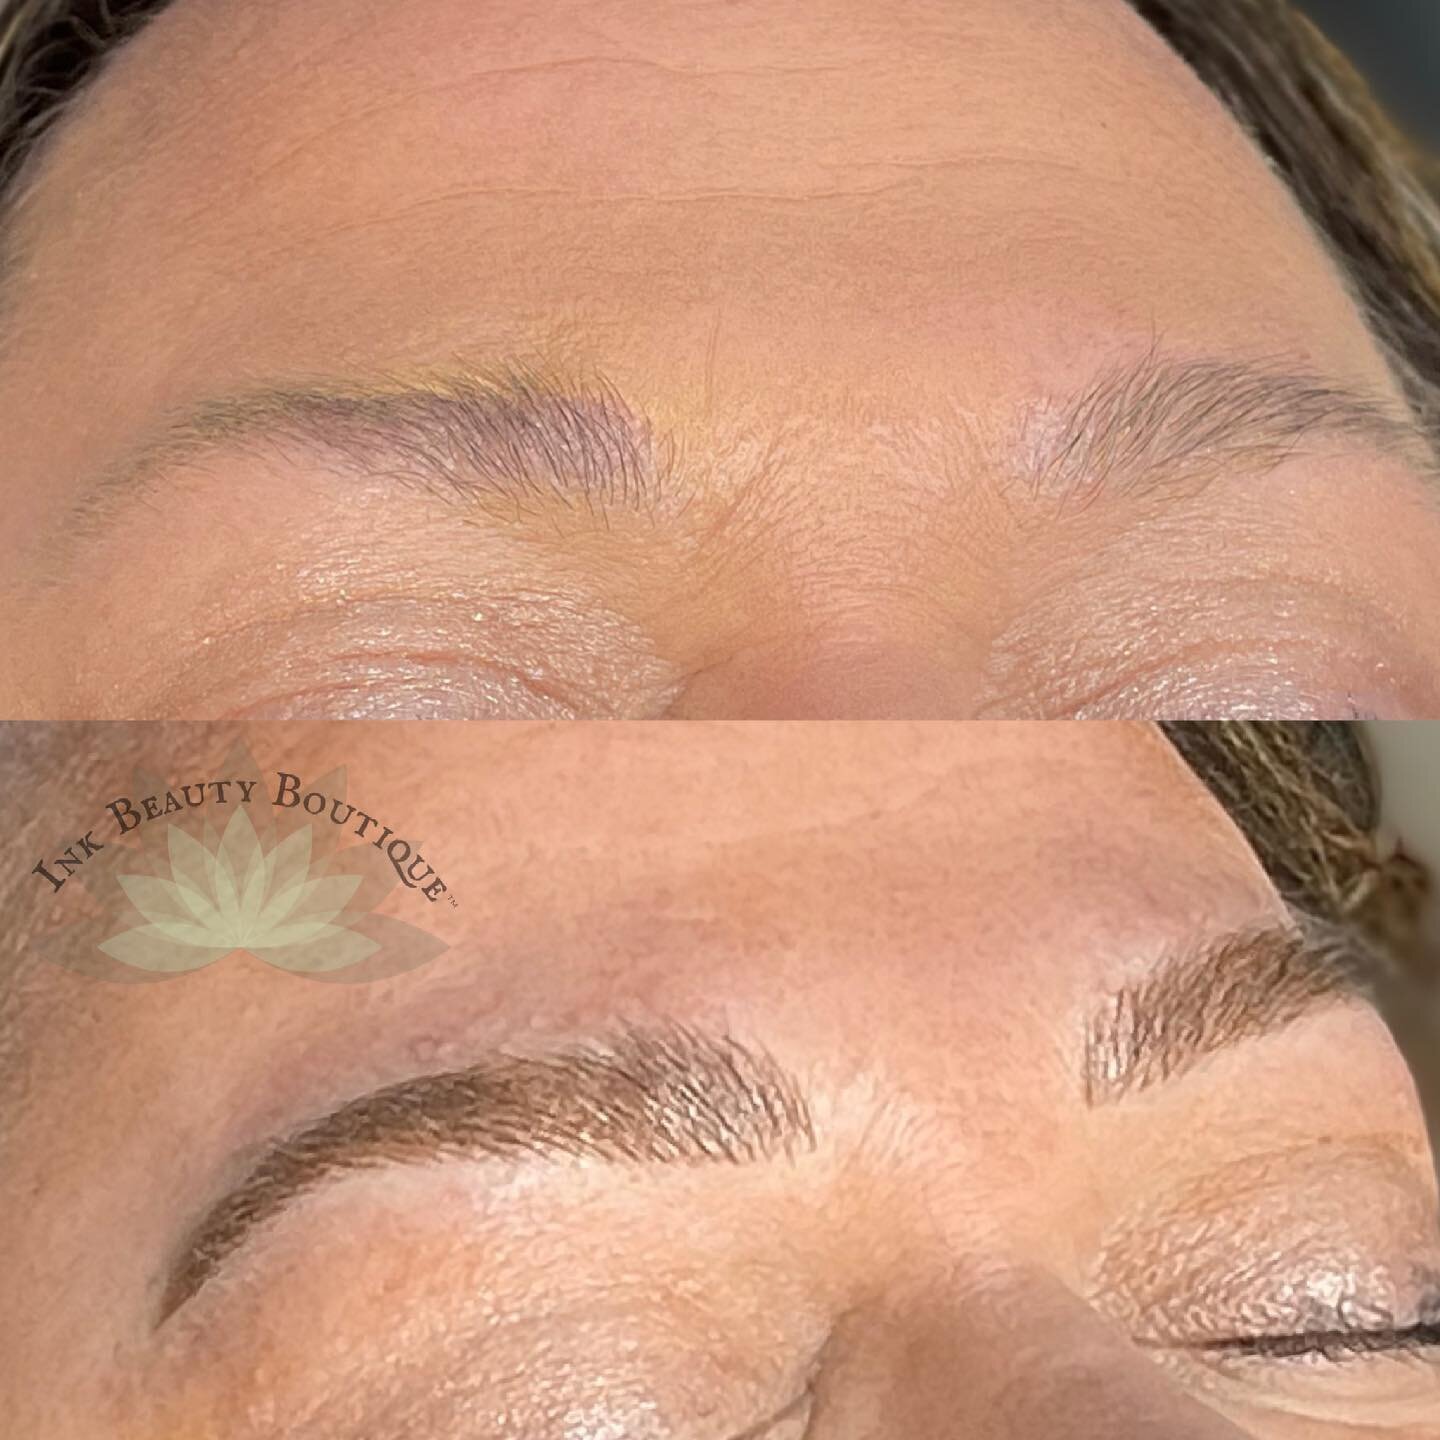 Combo brows are life 🙌🏽

You can book with me by clicking book now in my bio 🗓 I&rsquo;m here for you, DM or email me if you have any questions 😘

#portlandoregonbrows #pdxpermanentmakeup #pdxpmu #microbladedbrows #beauty #tattooedbrows #tattoo #